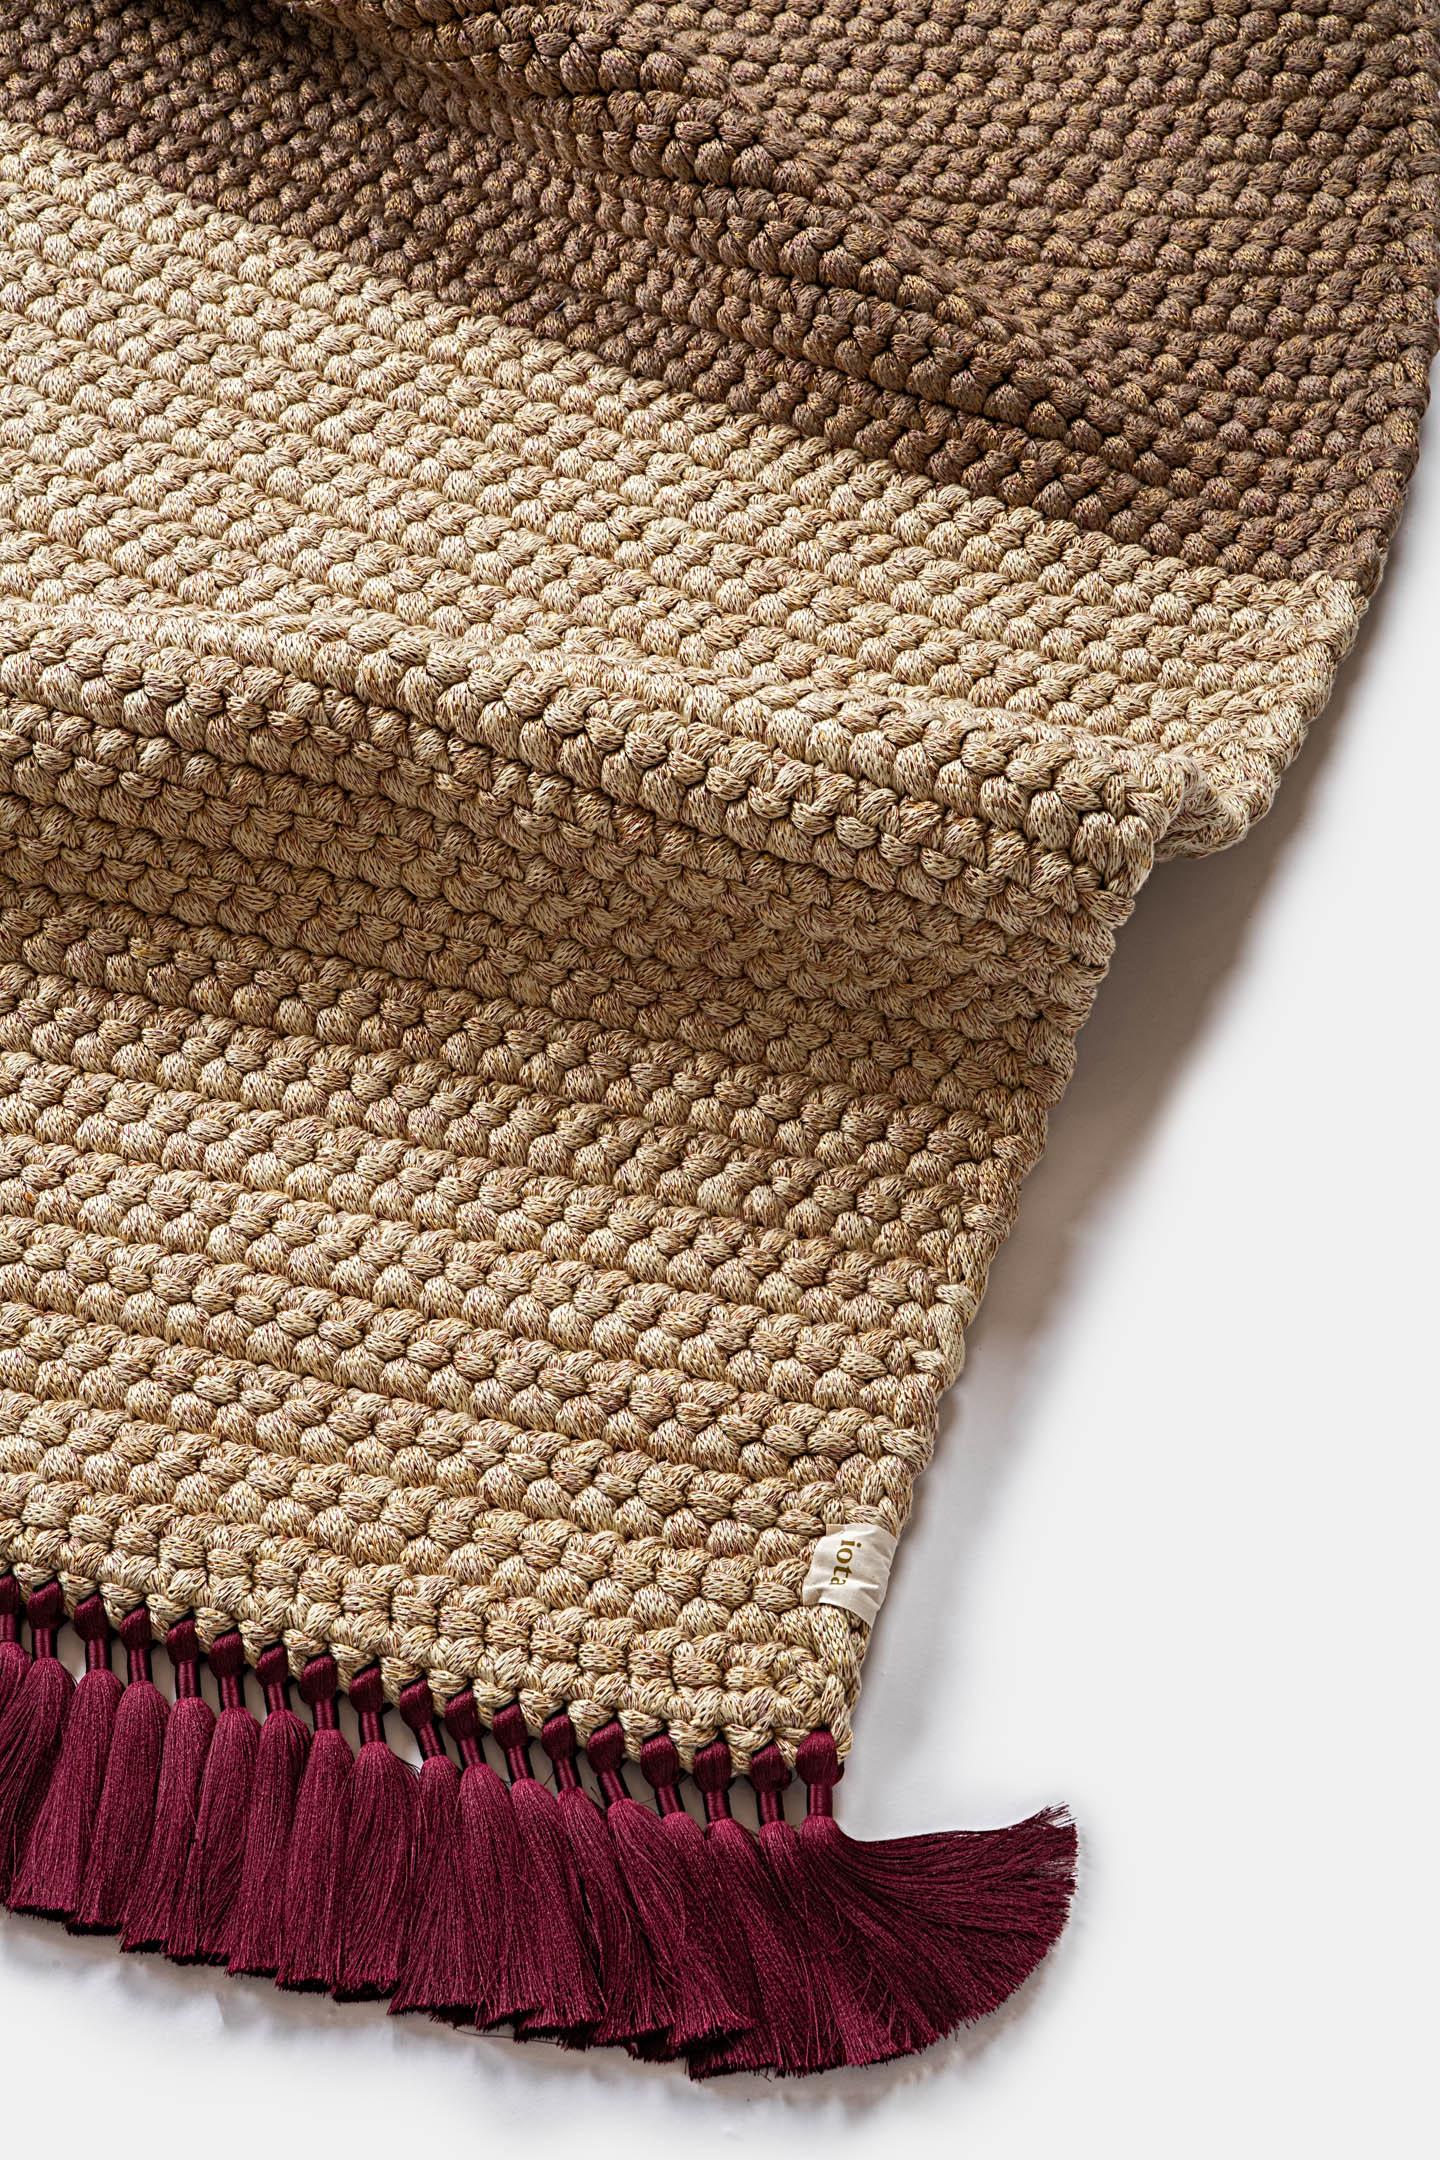 Contemporary Handmade Crochet Two-Tone Rug in Beige Brown made of Cotton & Polyester by iota